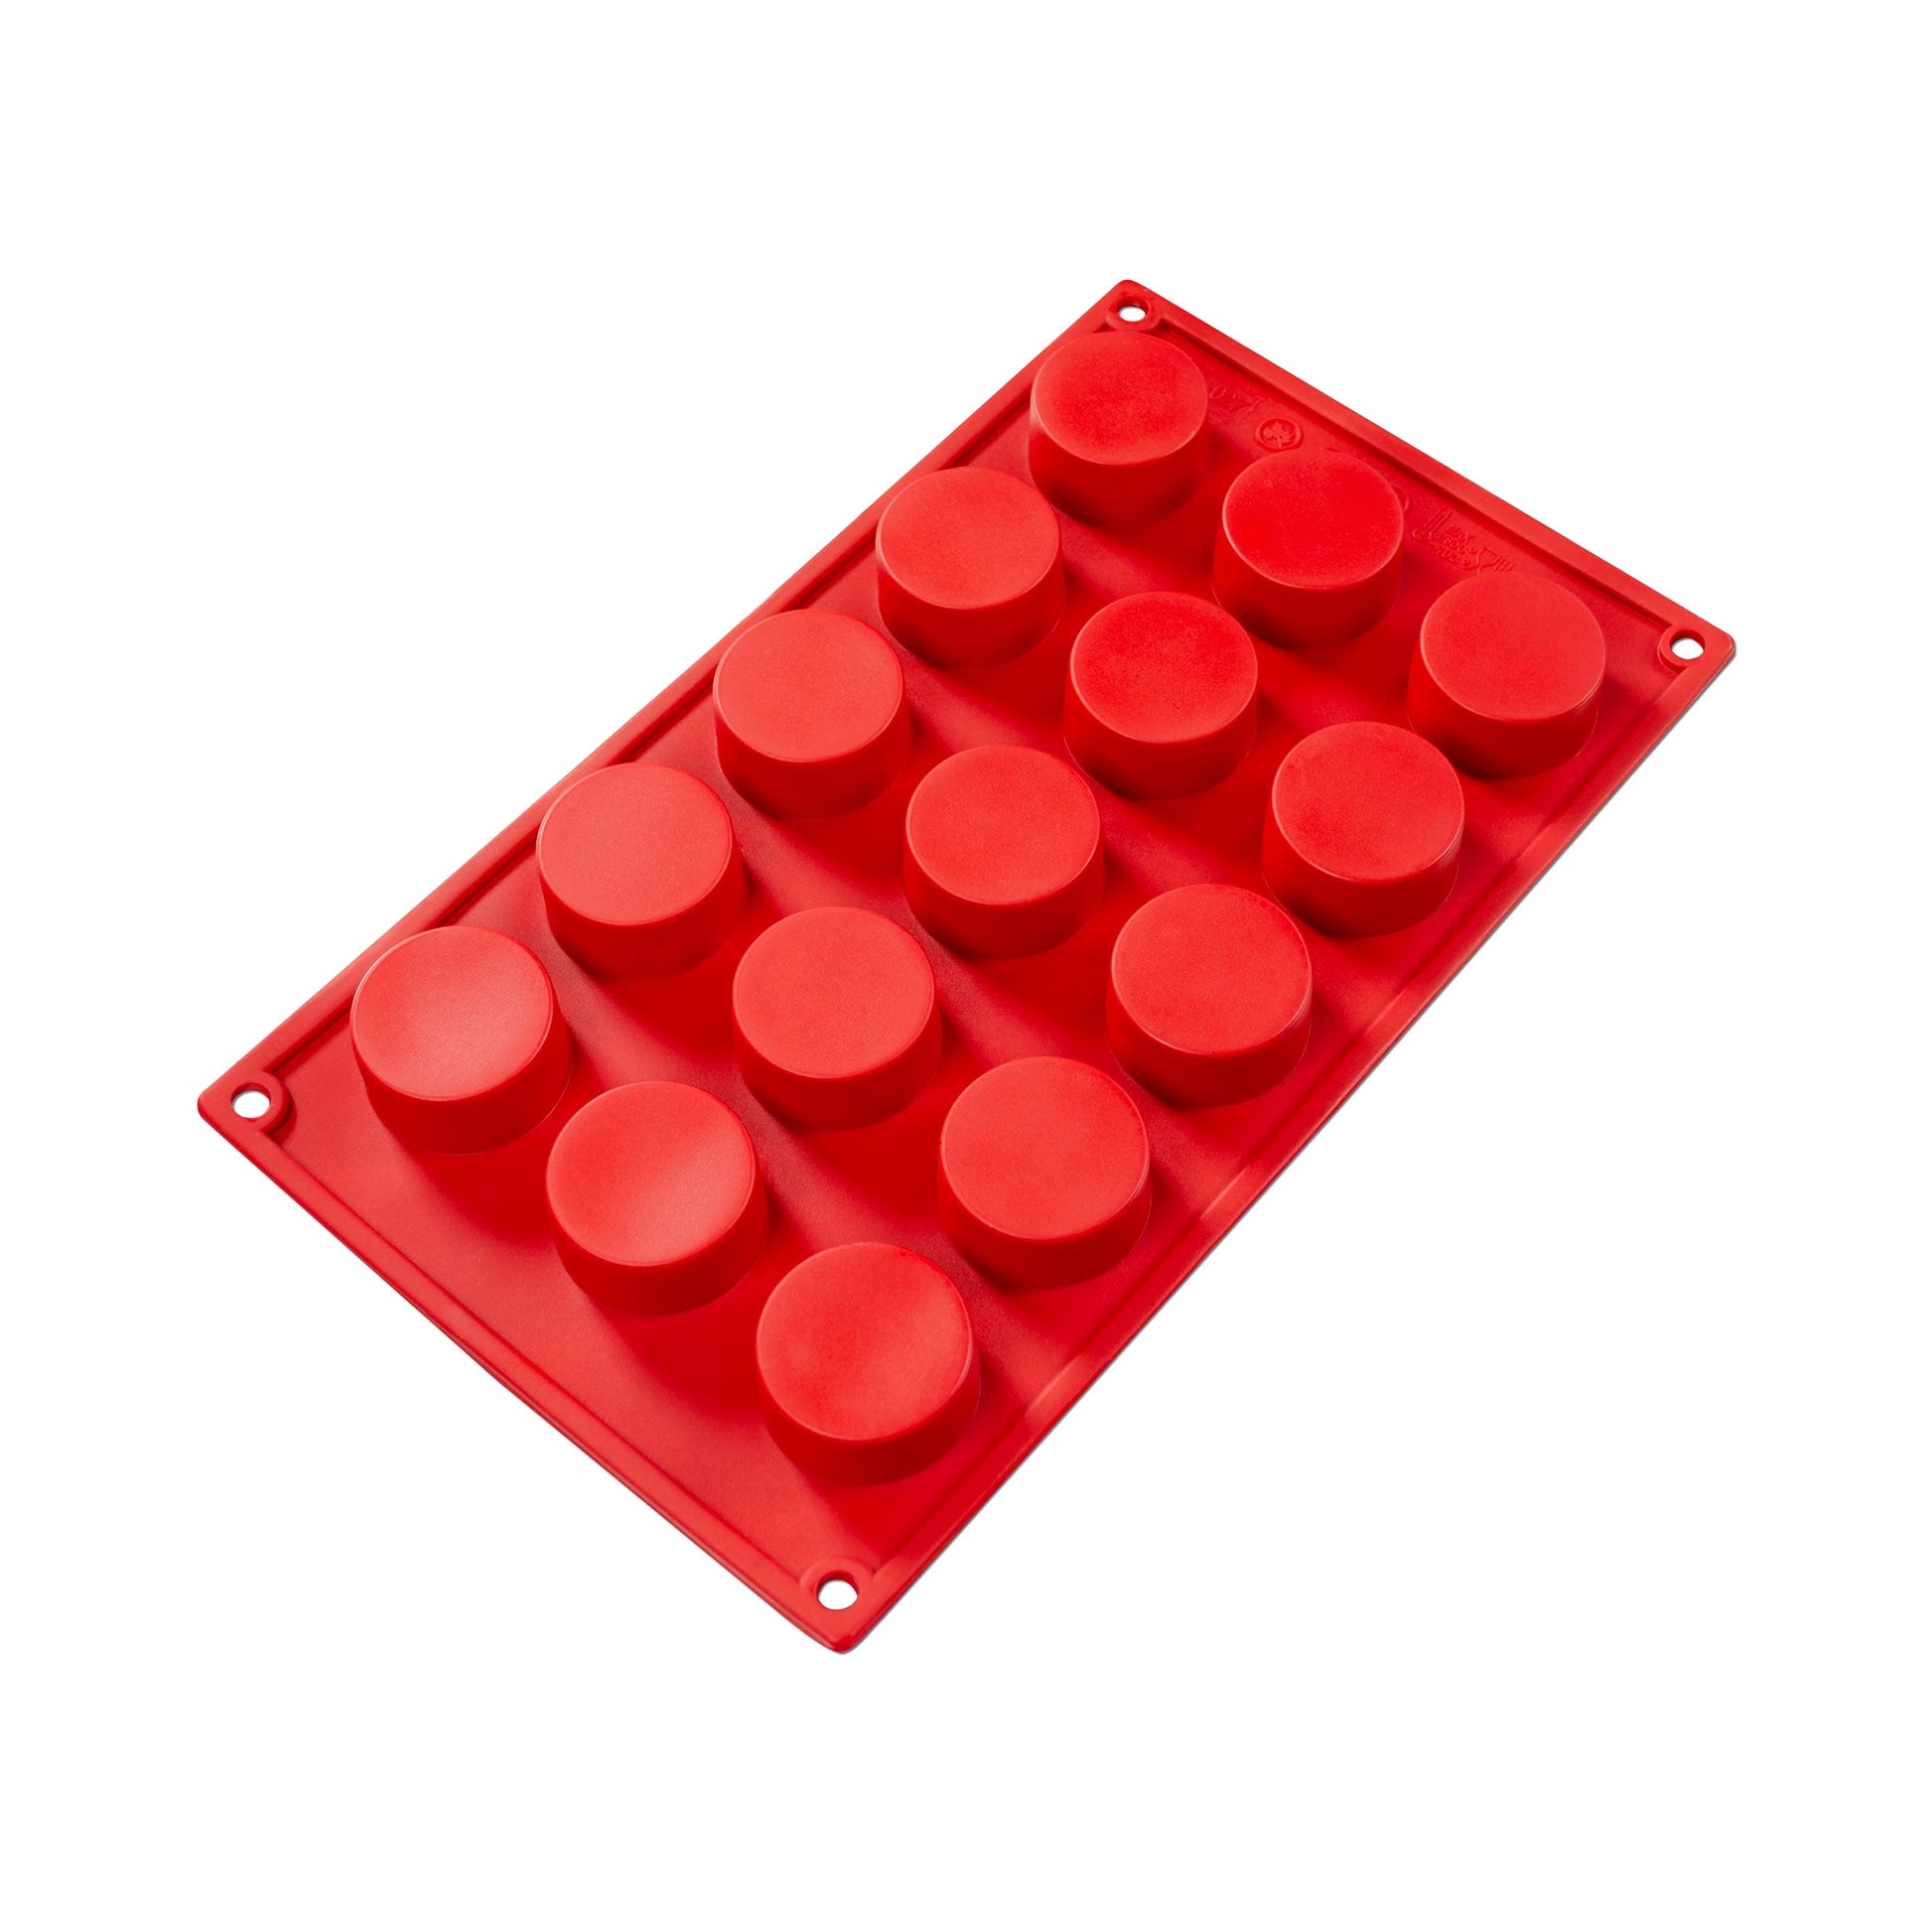 The reverse side of a red fat daddio's silicone mold for round petit fours, presenting a flat and smooth surface with round protrusions corresponding to each of the 15 cavities. This bottom view highlights the uniformity and precision of the mold design, which allows for consistent baking or candy-making results. The silicone material appears thick and durable, with an emphasis on professional-grade quality.